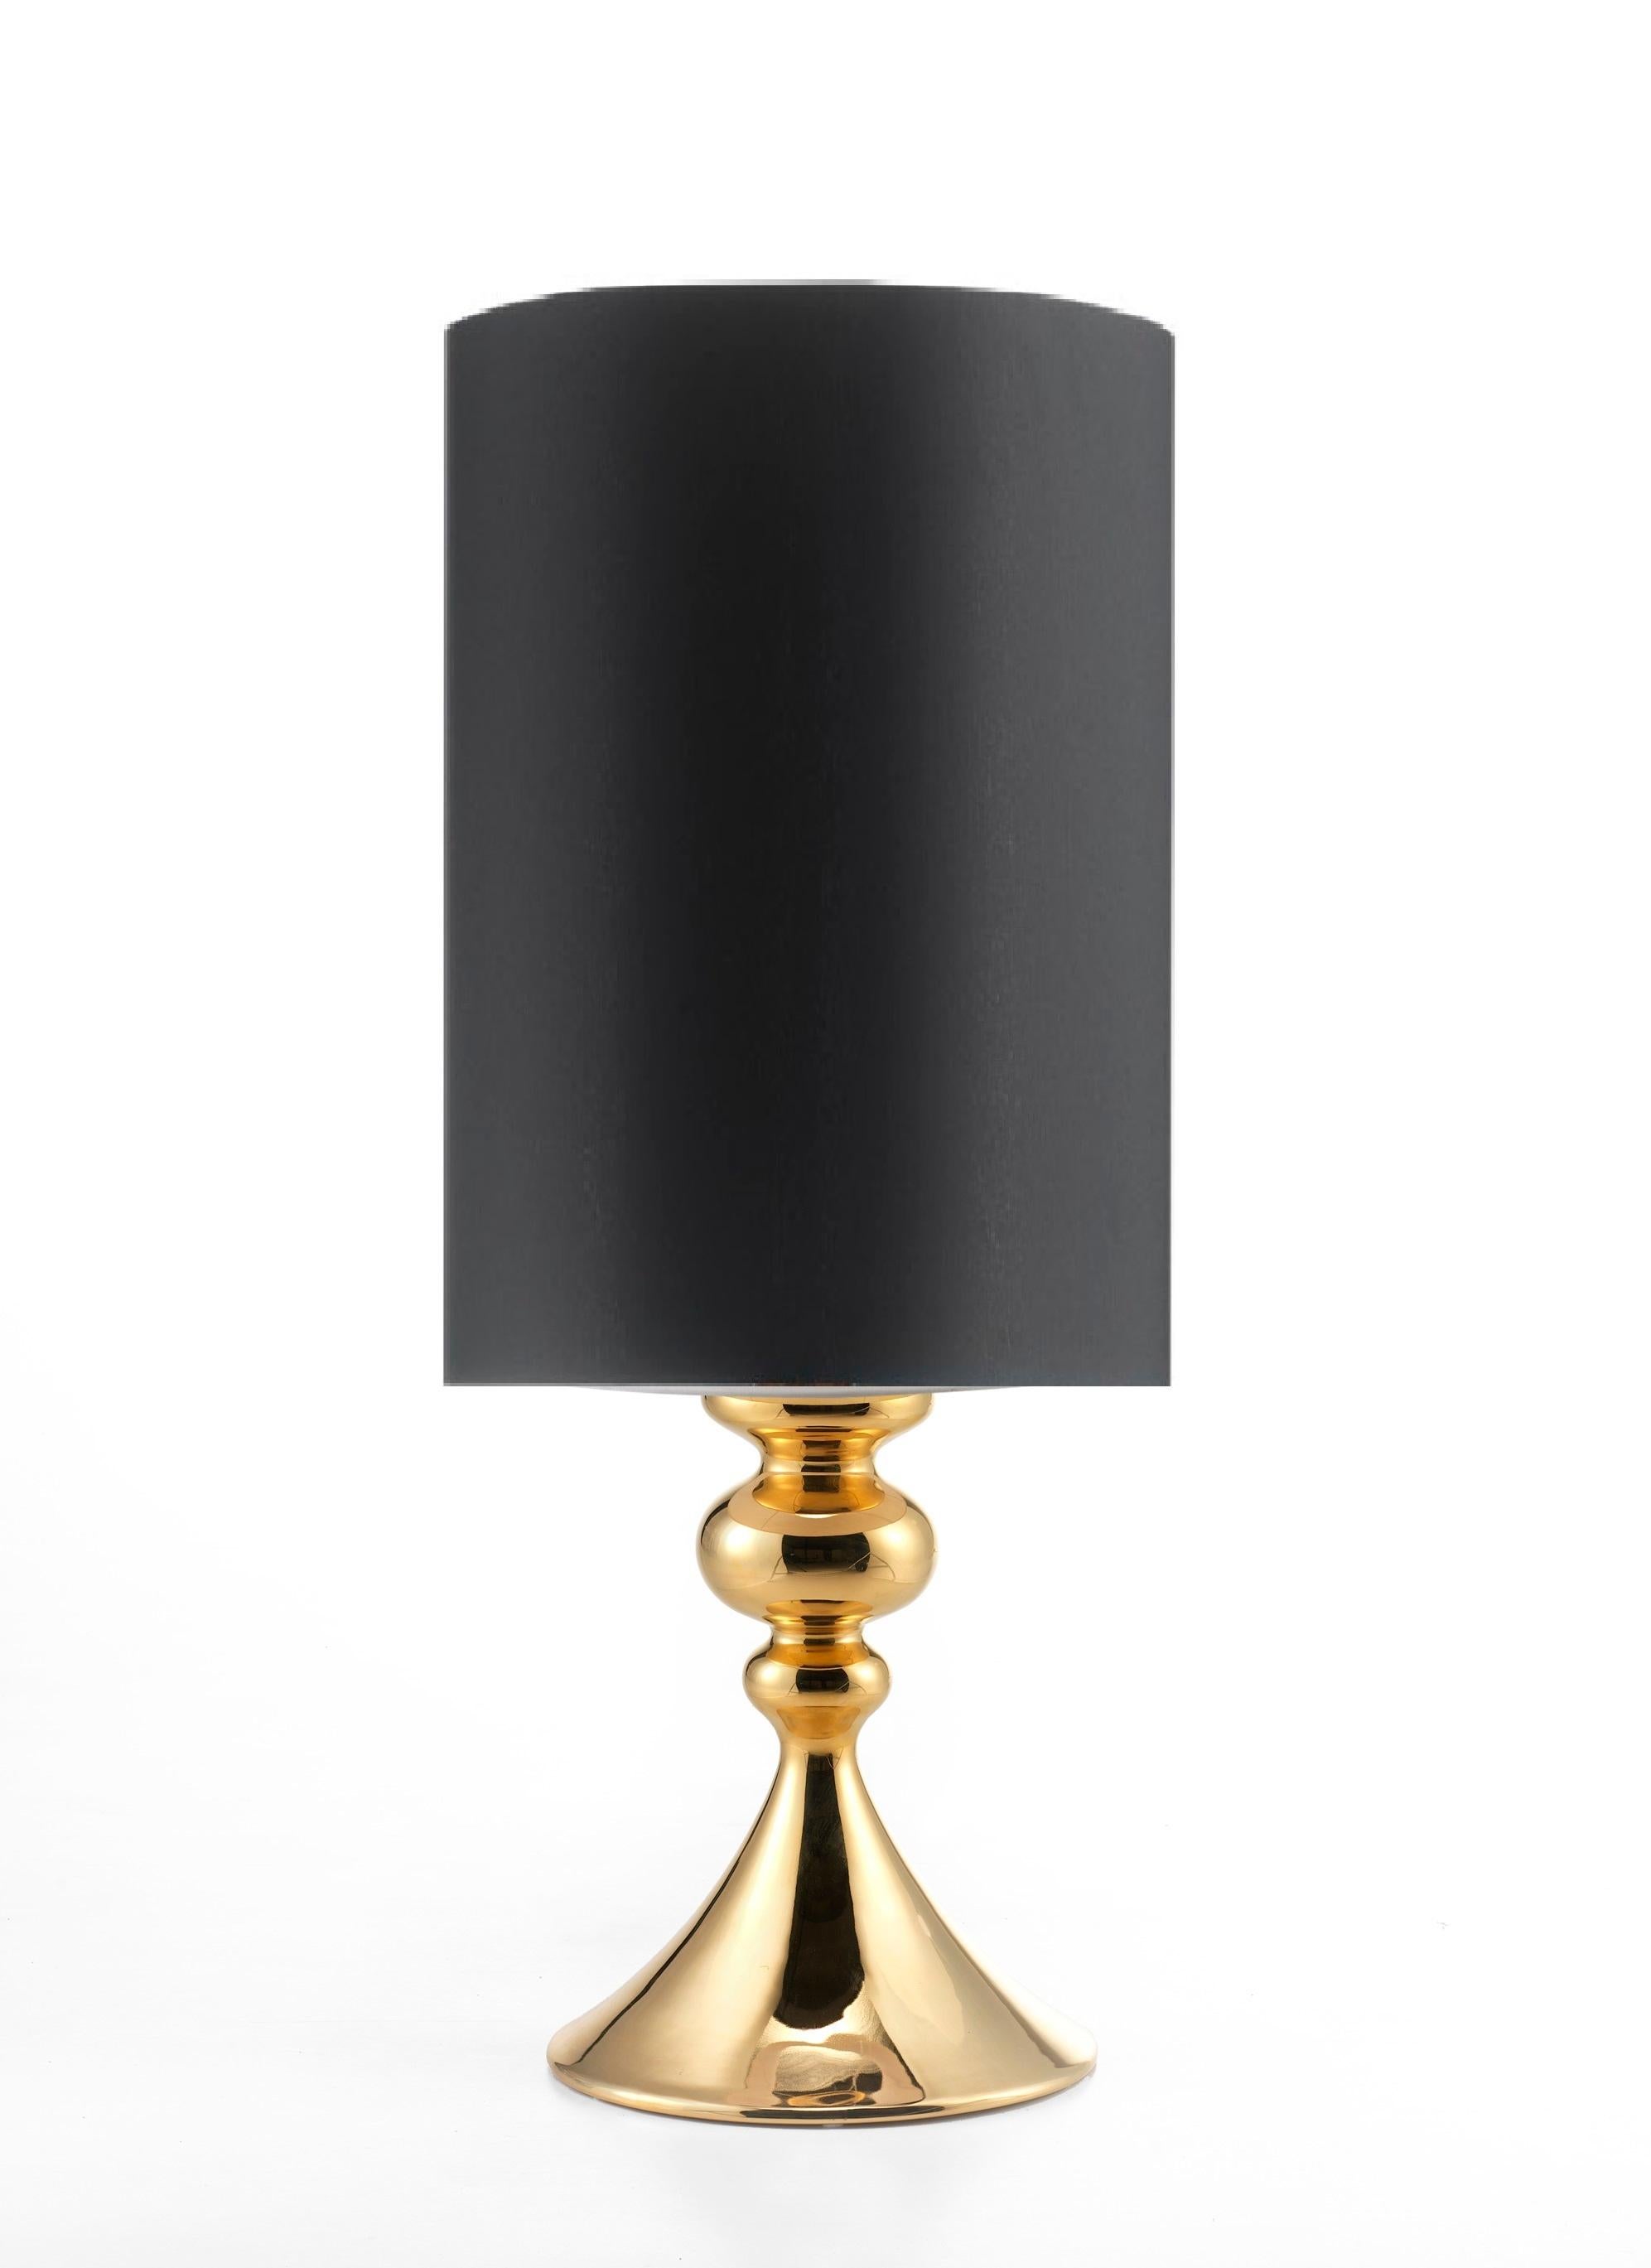 Contemporary KAY, Ceramic Lamp Handcrafted in 24-Karat Gold by Gabriella B. Made in Italy For Sale